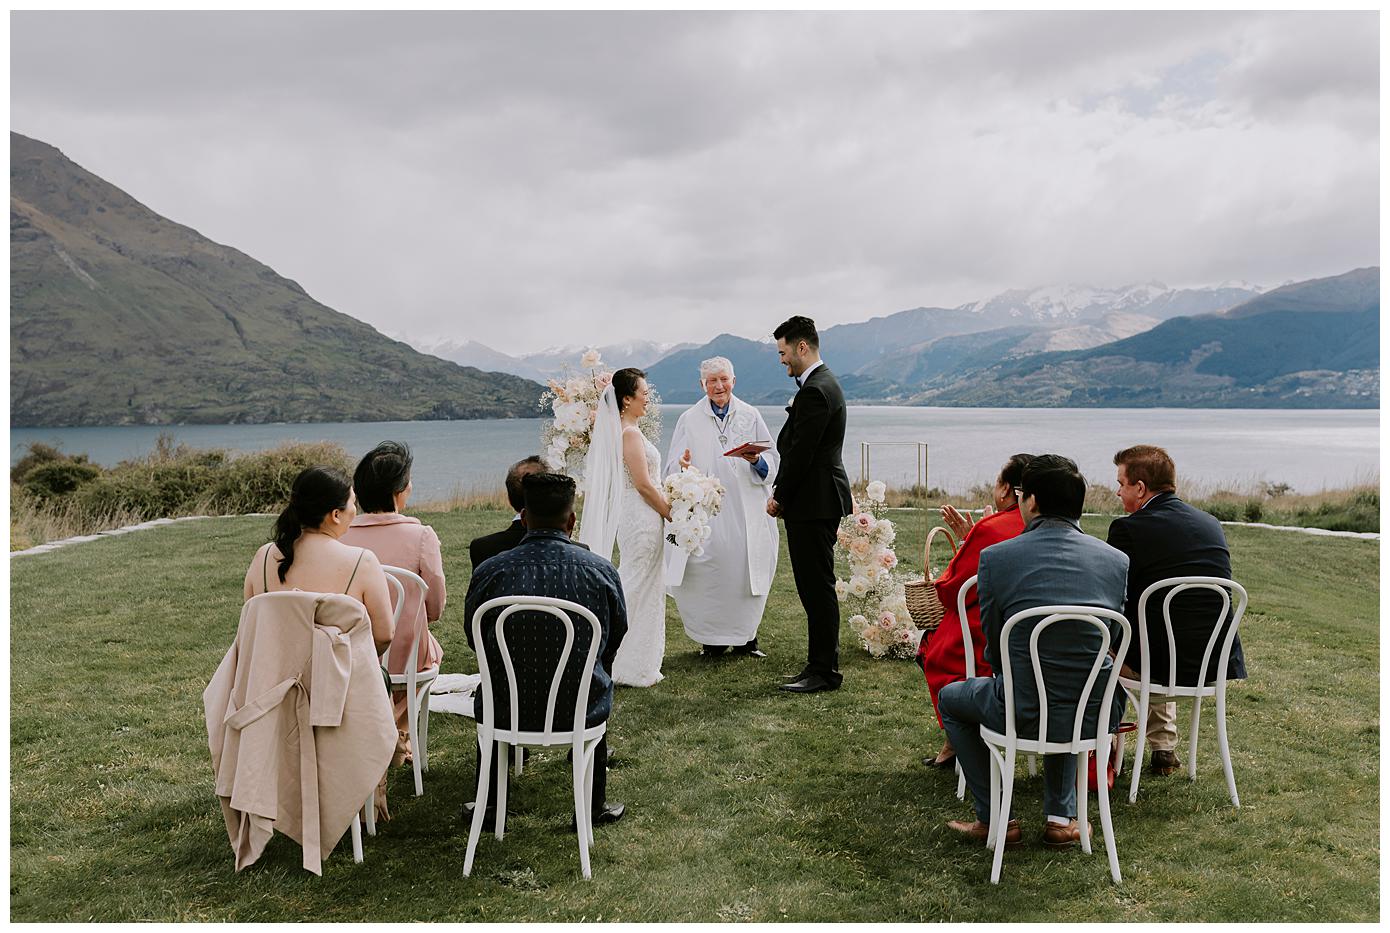 Charlotte Kiri Photography - Elopement Photography with the bride wearing a pretty long lace dress and sheer veil and the groom is wearing a black tuxedo suit, standing at the alter in front of a breathtaking backdrop of lakes and mountains at Jack's Retreat in Queenstown, New Zealand